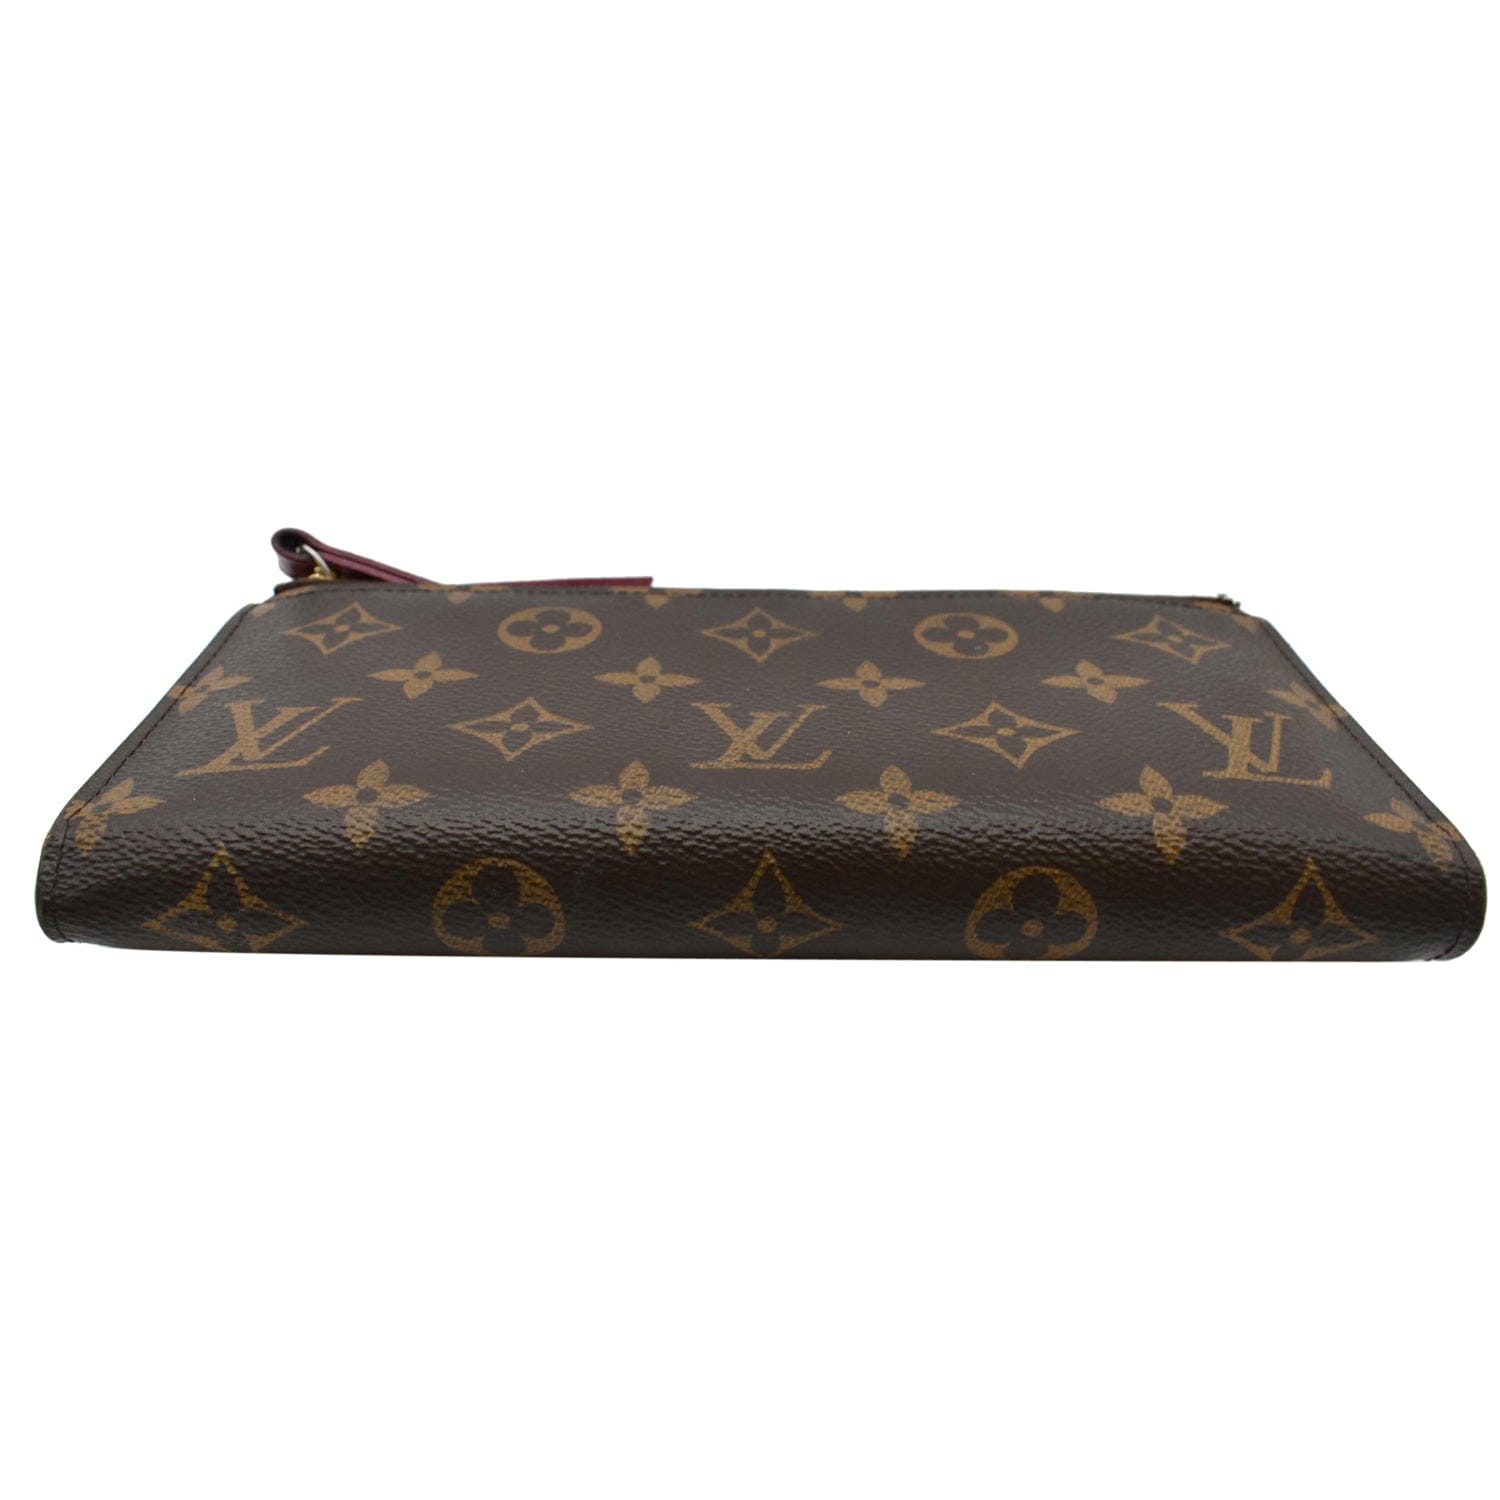 Louis Vuitton Adele Monogram Canvas & Red Coquelicot Leather Bifold Wallet